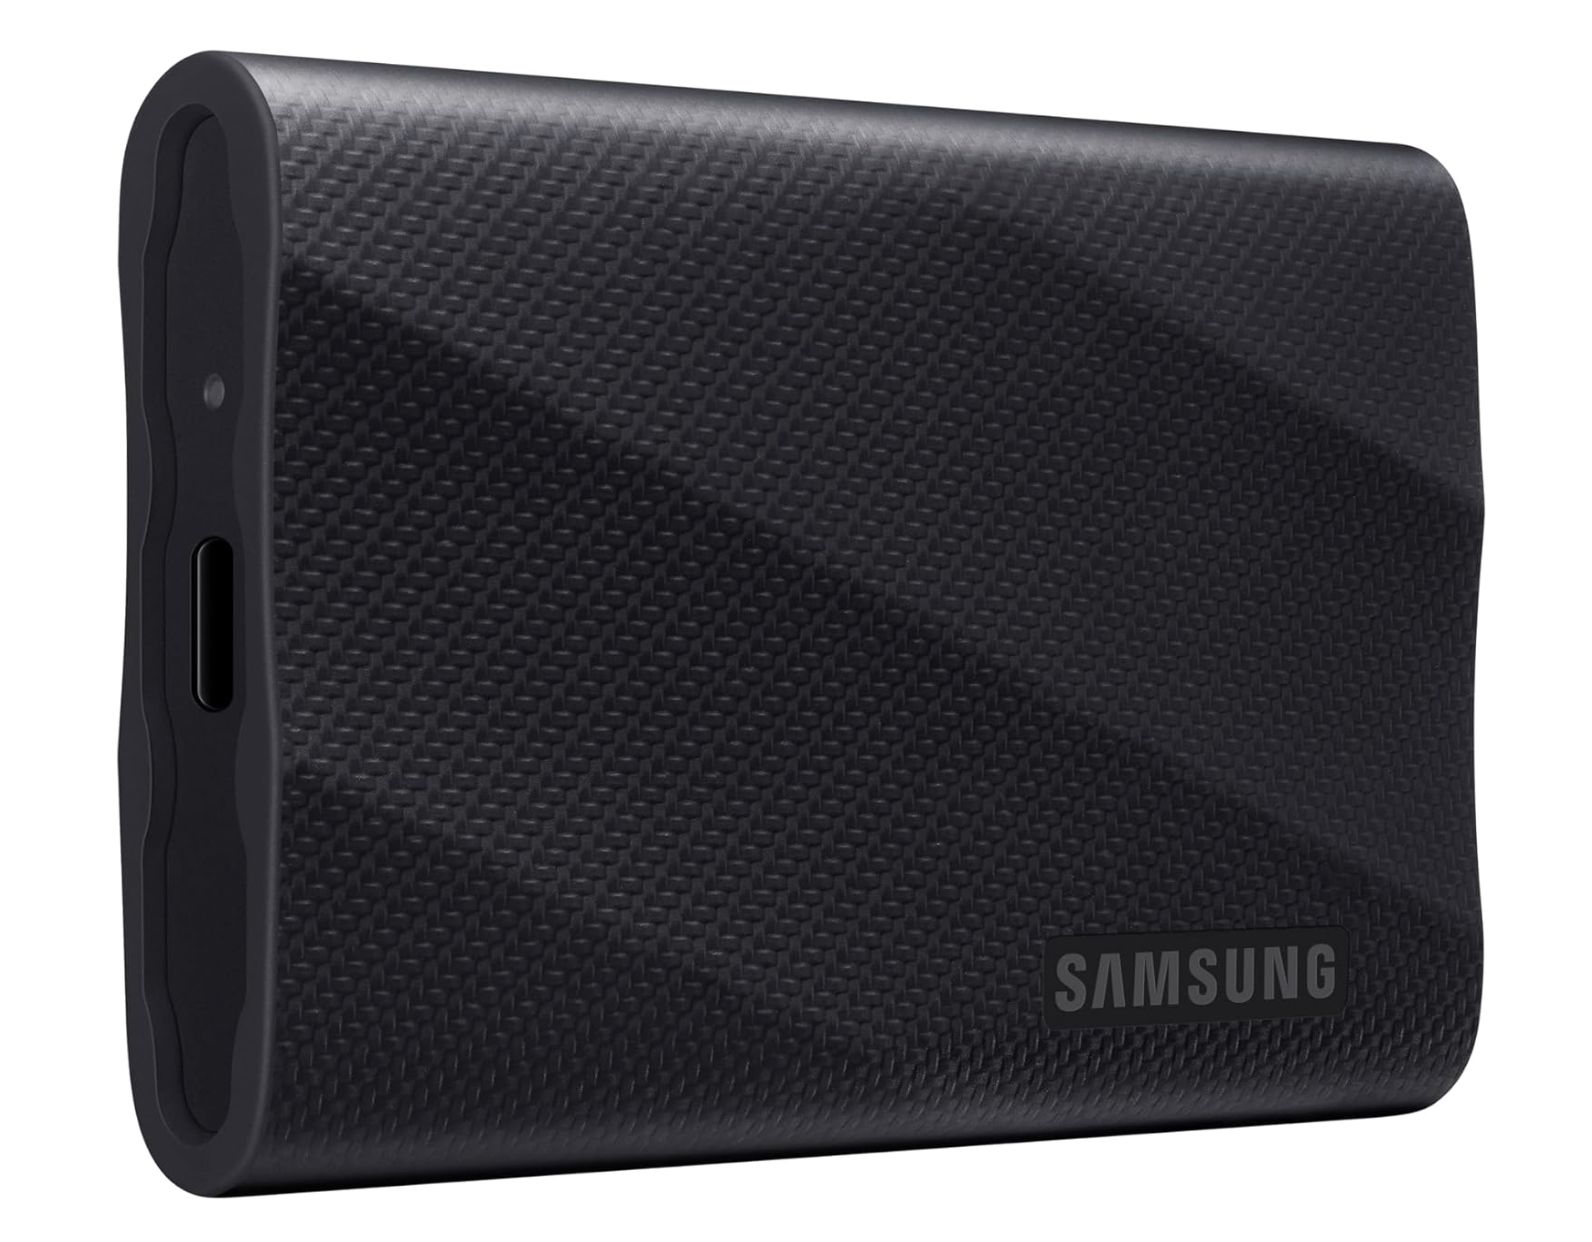 Samsung's new T9 portable SSD